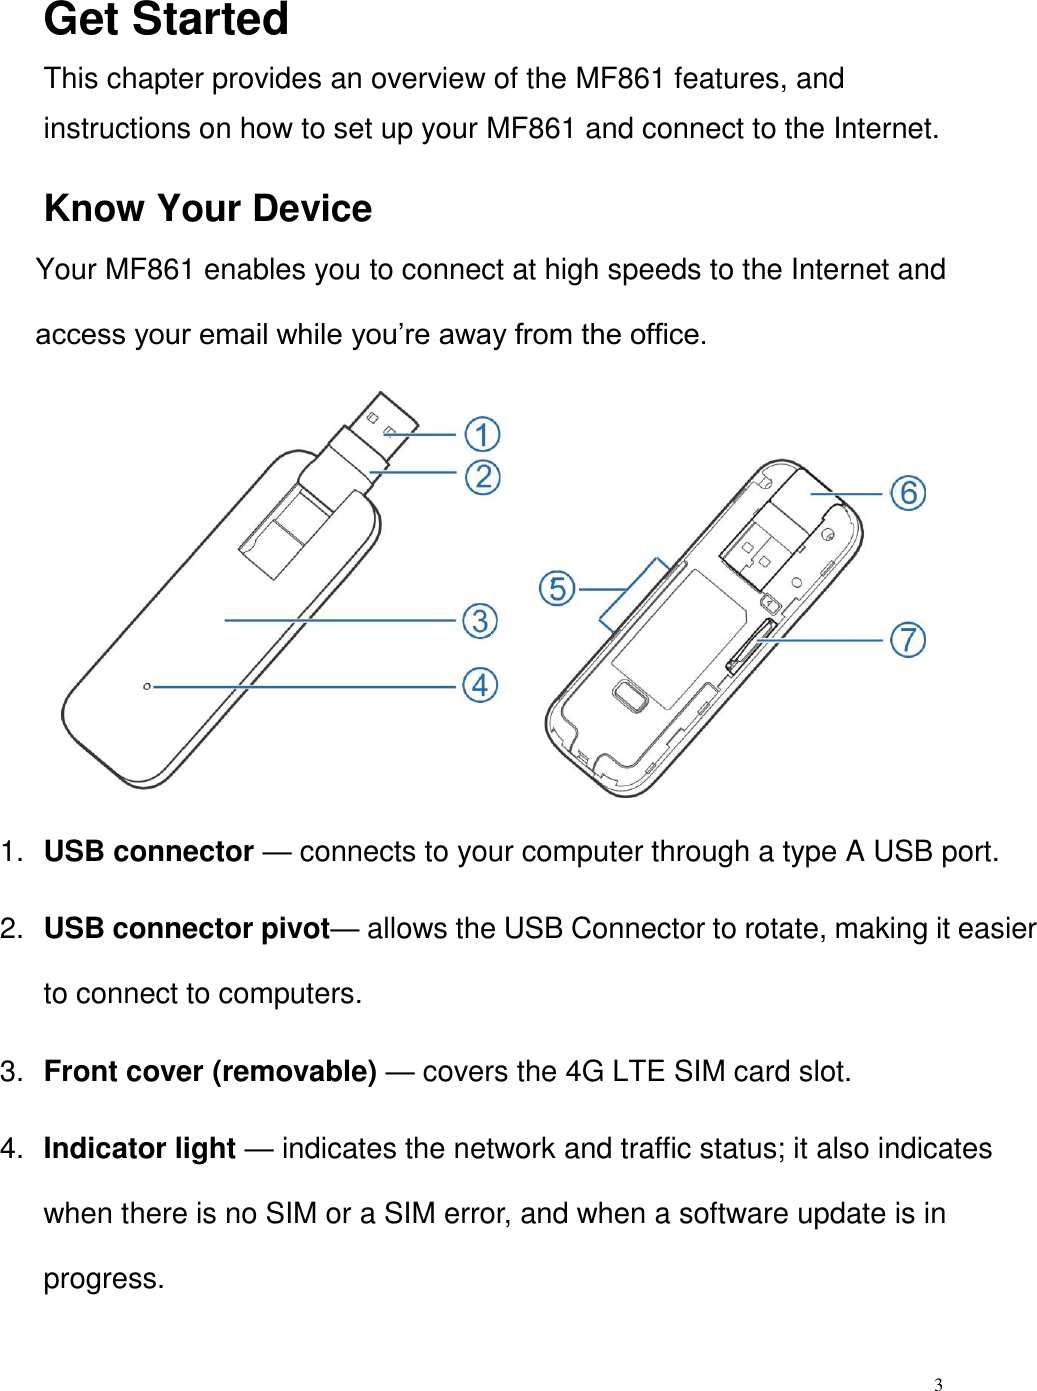 3  Get Started This chapter provides an overview of the MF861 features, and instructions on how to set up your MF861 and connect to the Internet.   Know Your Device   Your MF861 enables you to connect at high speeds to the Internet and access your email while you’re away from the office.          1. USB connector — connects to your computer through a type A USB port.   2. USB connector pivot— allows the USB Connector to rotate, making it easier to connect to computers. 3. Front cover (removable) — covers the 4G LTE SIM card slot.   4. Indicator light — indicates the network and traffic status; it also indicates when there is no SIM or a SIM error, and when a software update is in progress.   